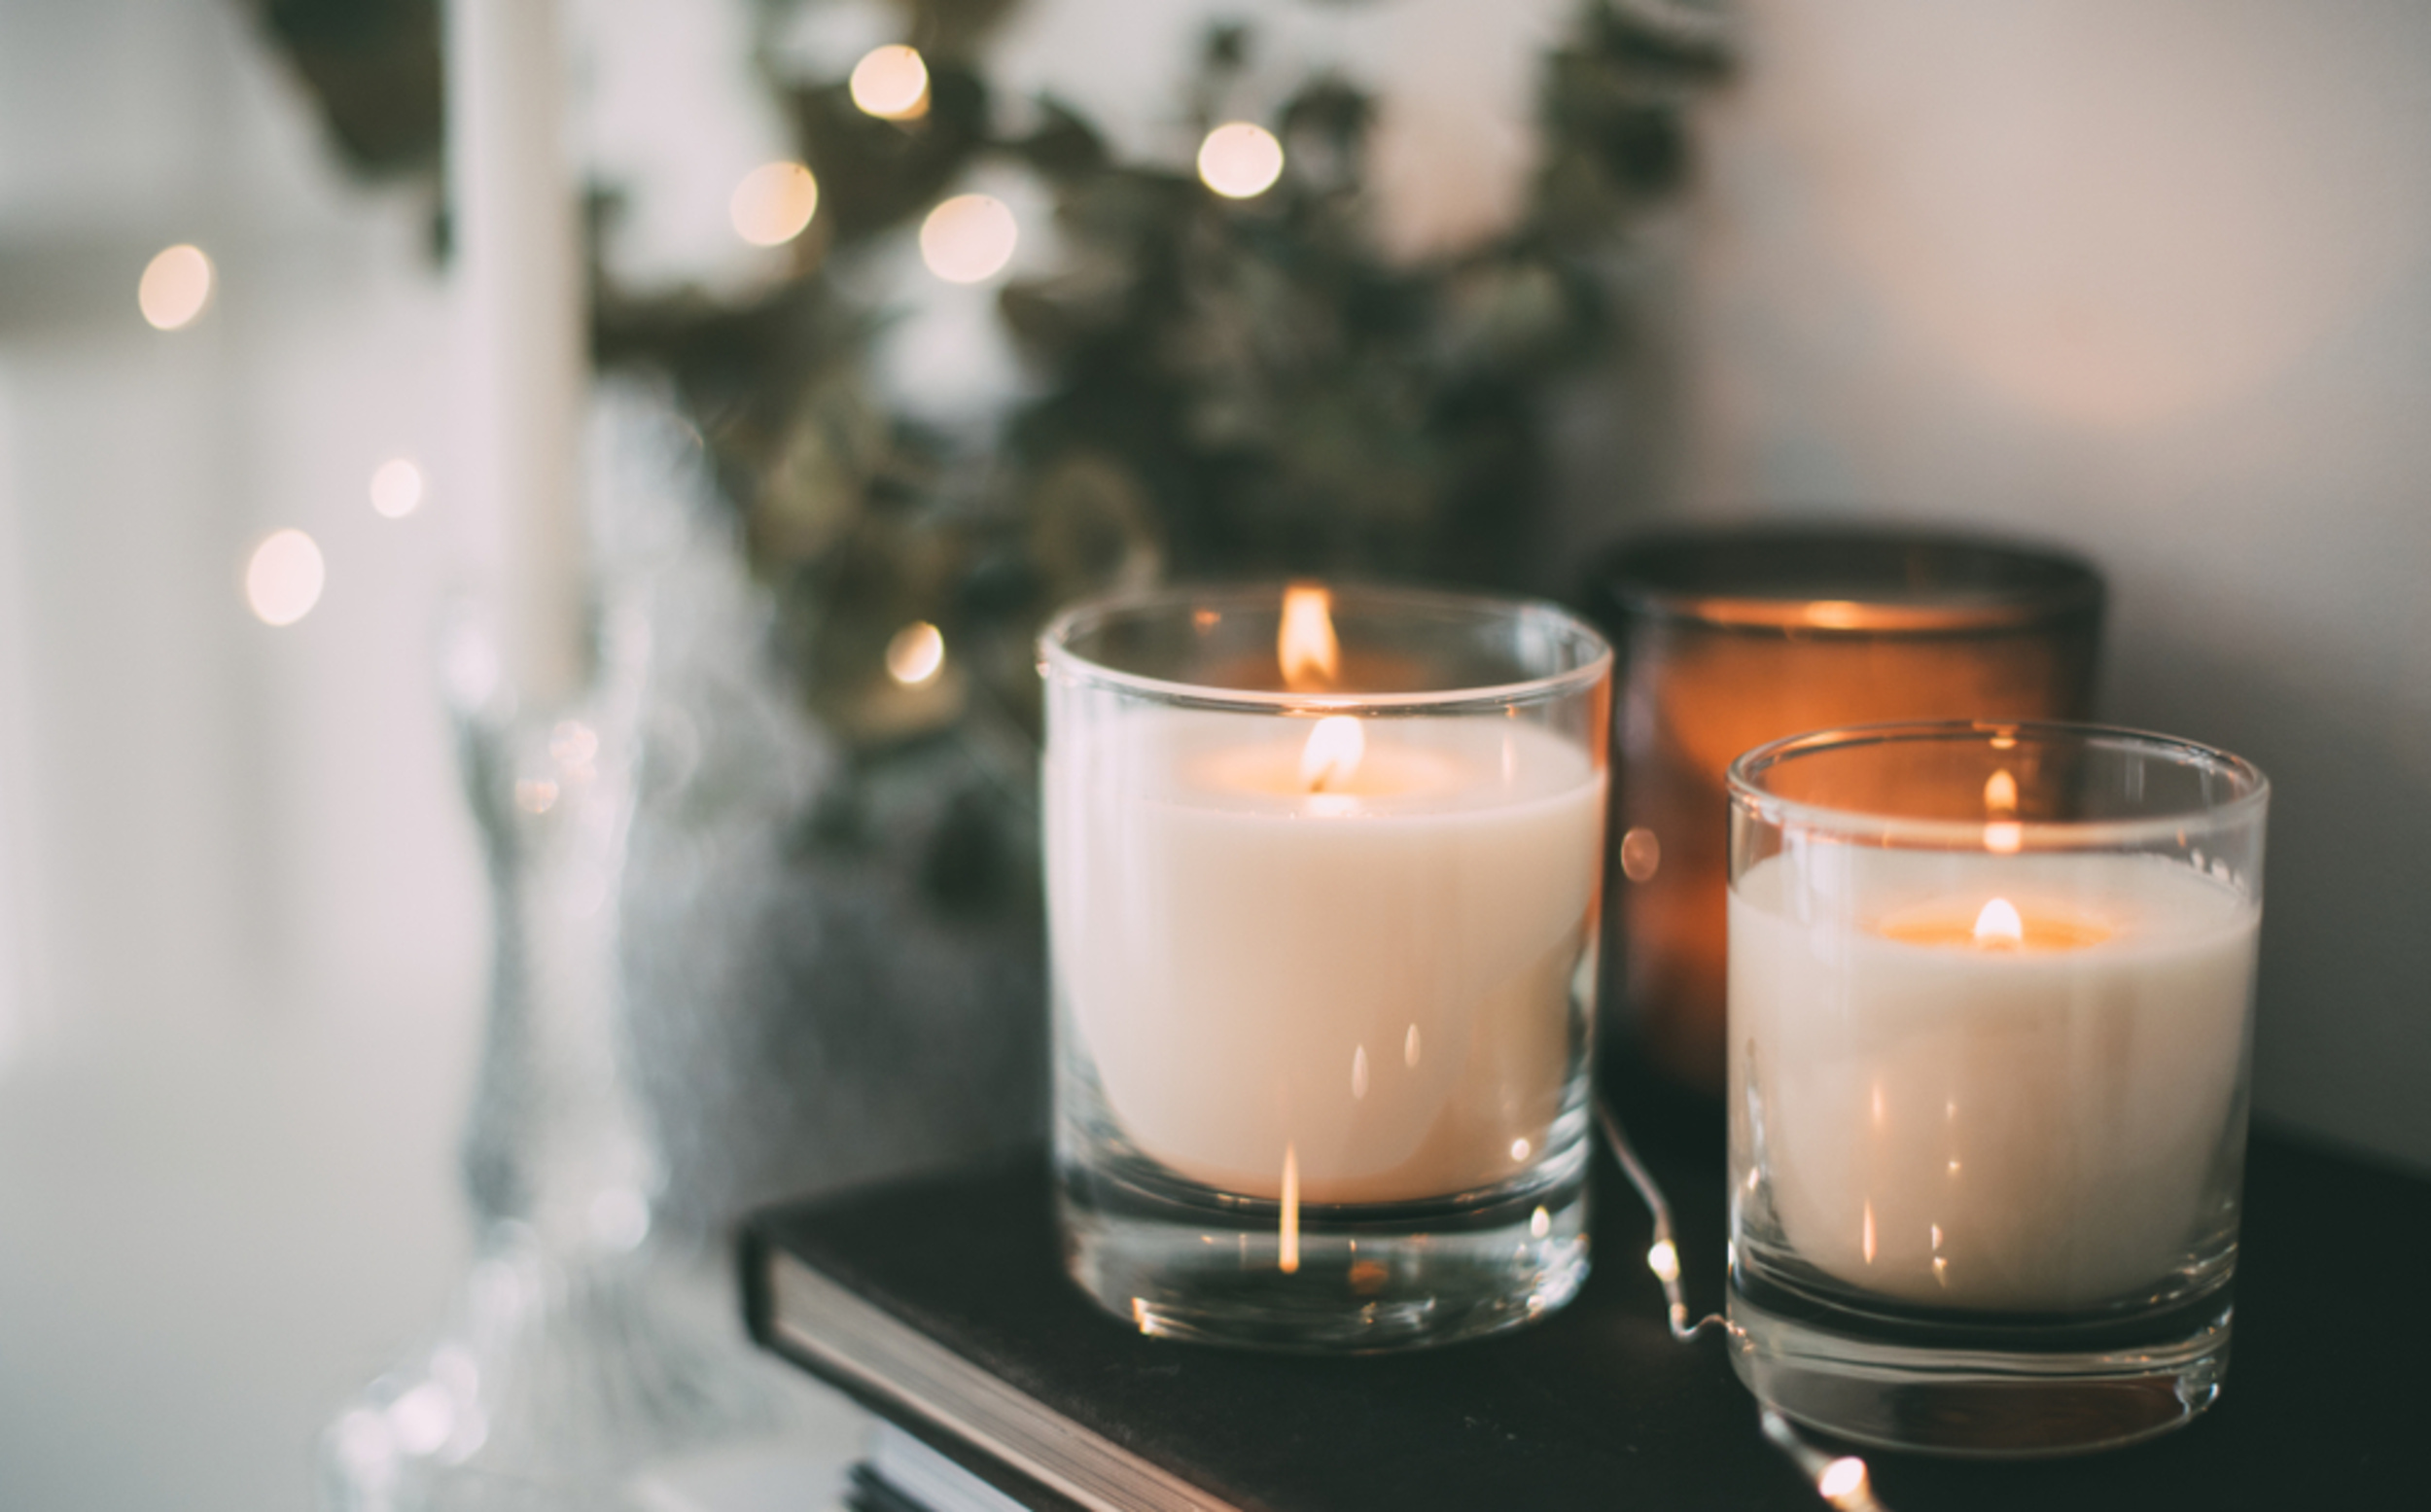 <p>Once you're at the bottom of a candle, don't toss out that wax! Stick the jar in the freezer for a few hours and use a butter knife to pry out the remaining wax, then toss your new DIY wax melt into a candle warmer to extend the scent just a little bit longer. </p><p><a href='https://www.msn.com/en-us/community/channel/vid-cj9pqbr0vn9in2b6ddcd8sfgpfq6x6utp44fssrv6mc2gtybw0us'>Follow us on MSN to see more of our exclusive lifestyle content.</a></p>